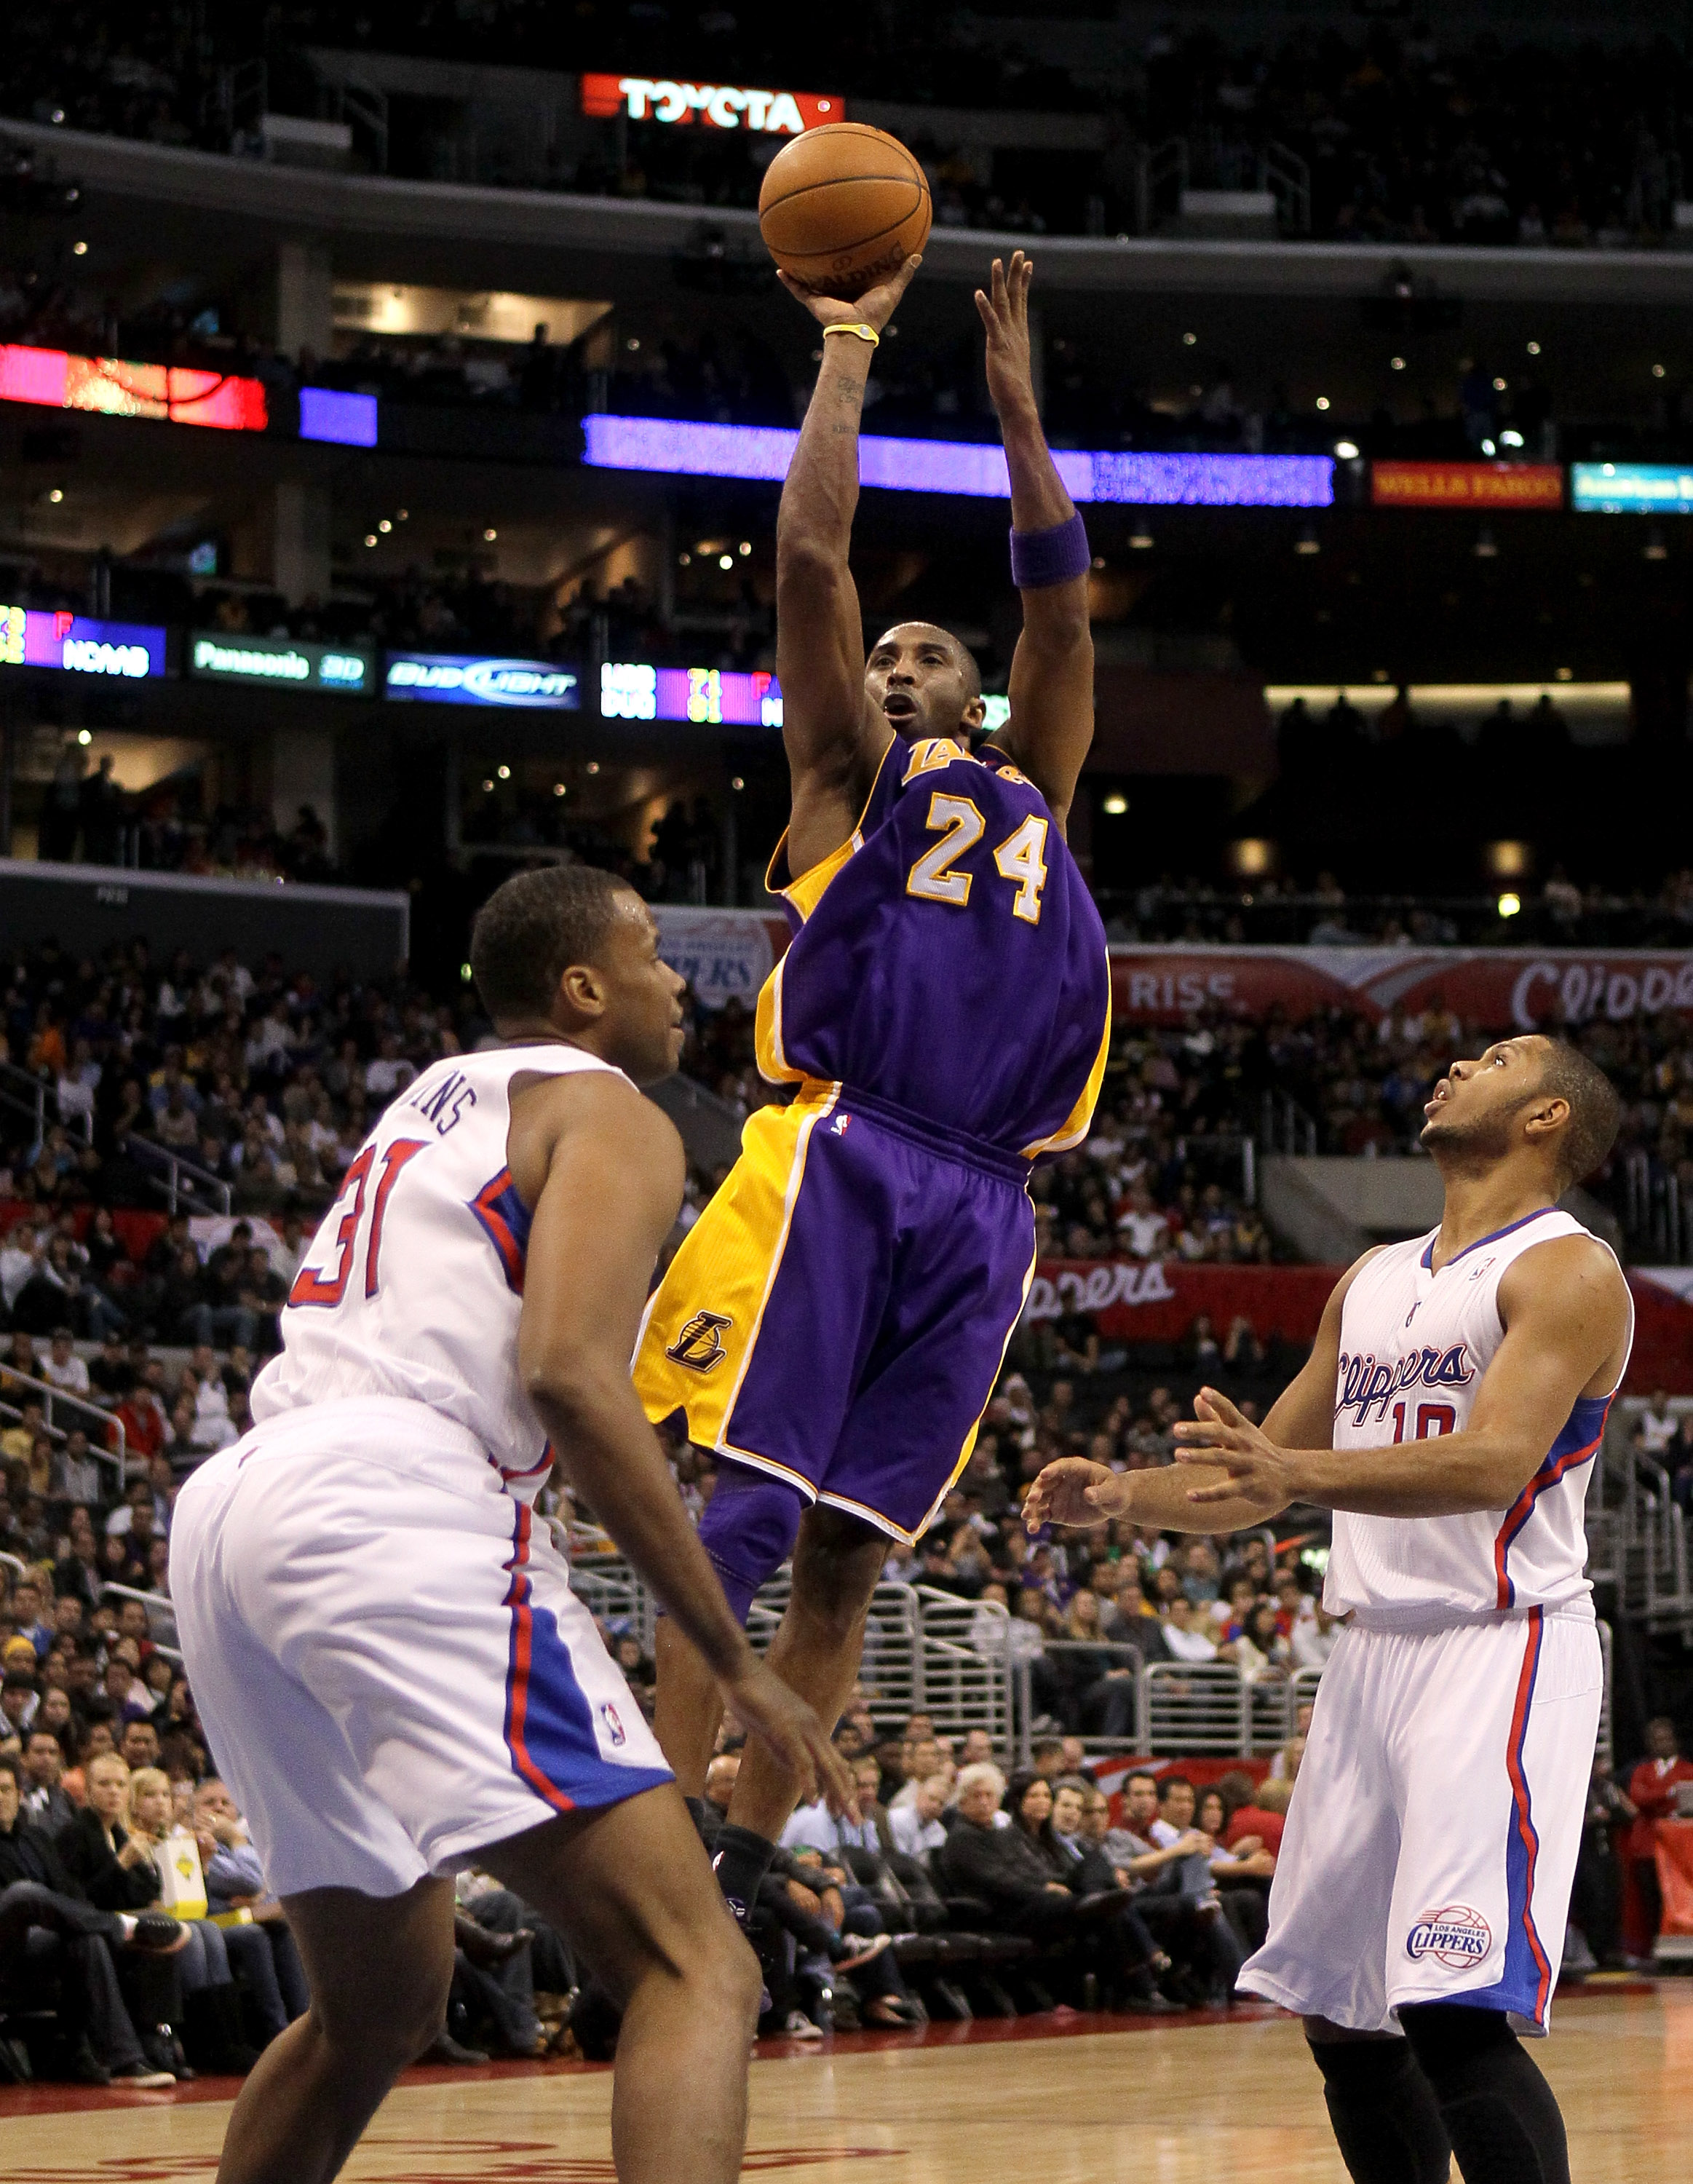 LOS ANGELES, CA - DECEMBER 8:  Kobe Bryant #24 of the Los Angeles Lakers shoots over Jarron Collins #31 and Eric Gordon #10 of the Los Angeles Clippers at Staples Center on December 8, 2010 in Los Angeles, California.  The Lakers won 87-86.  NOTE TO USER: